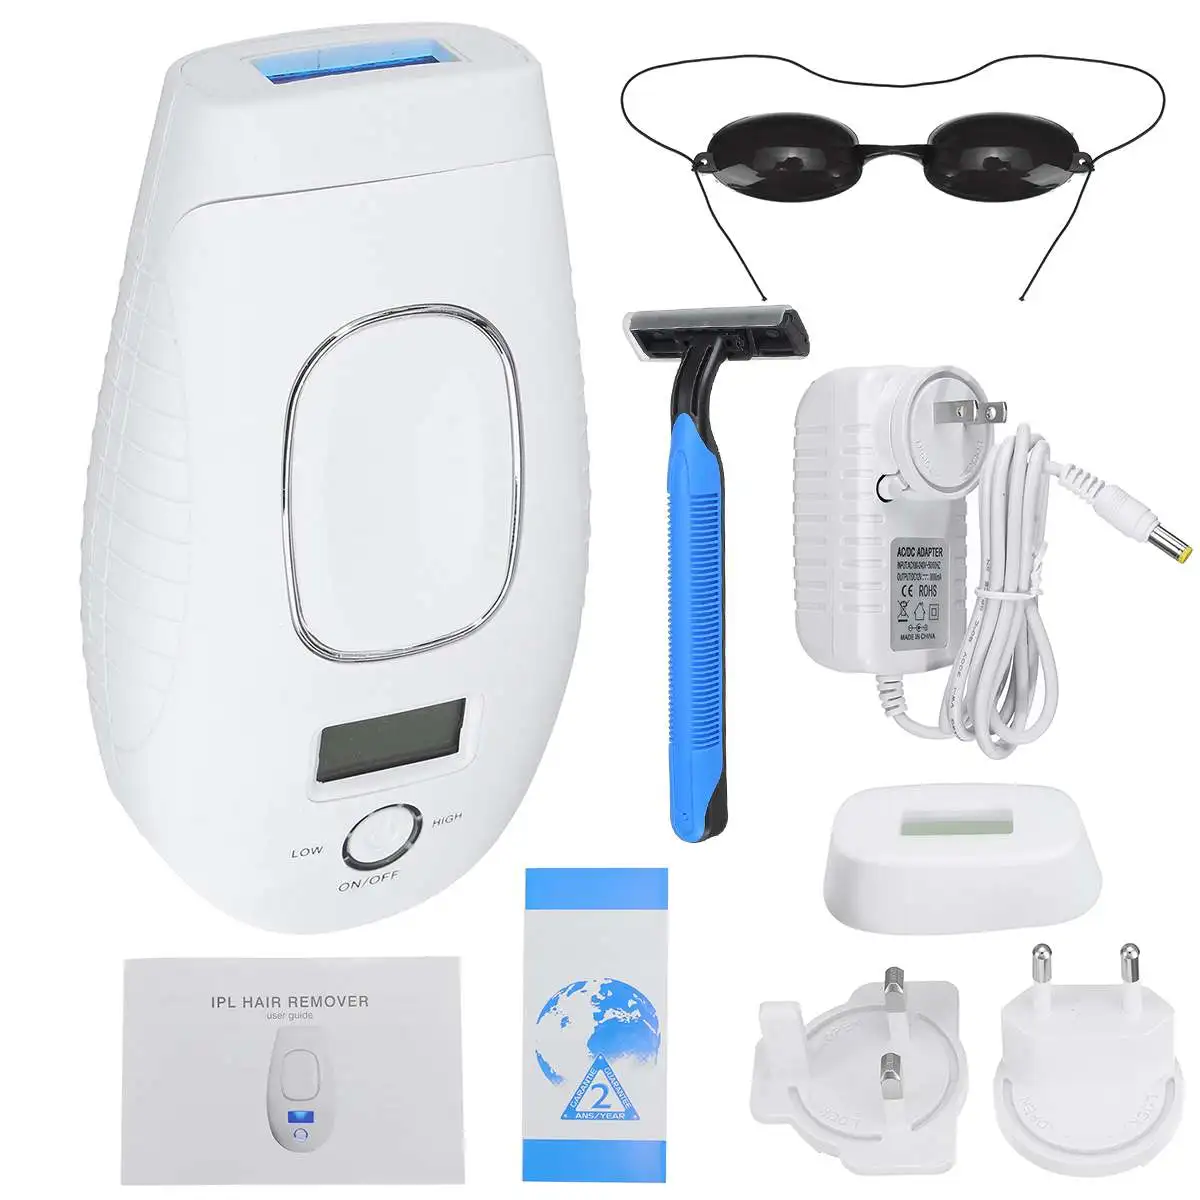 

Mini Handheld Laser Epilator Depilador Facial Permanent Hair Removal Device Whole Body Laser Hair Remover Machine 600000 Flashes